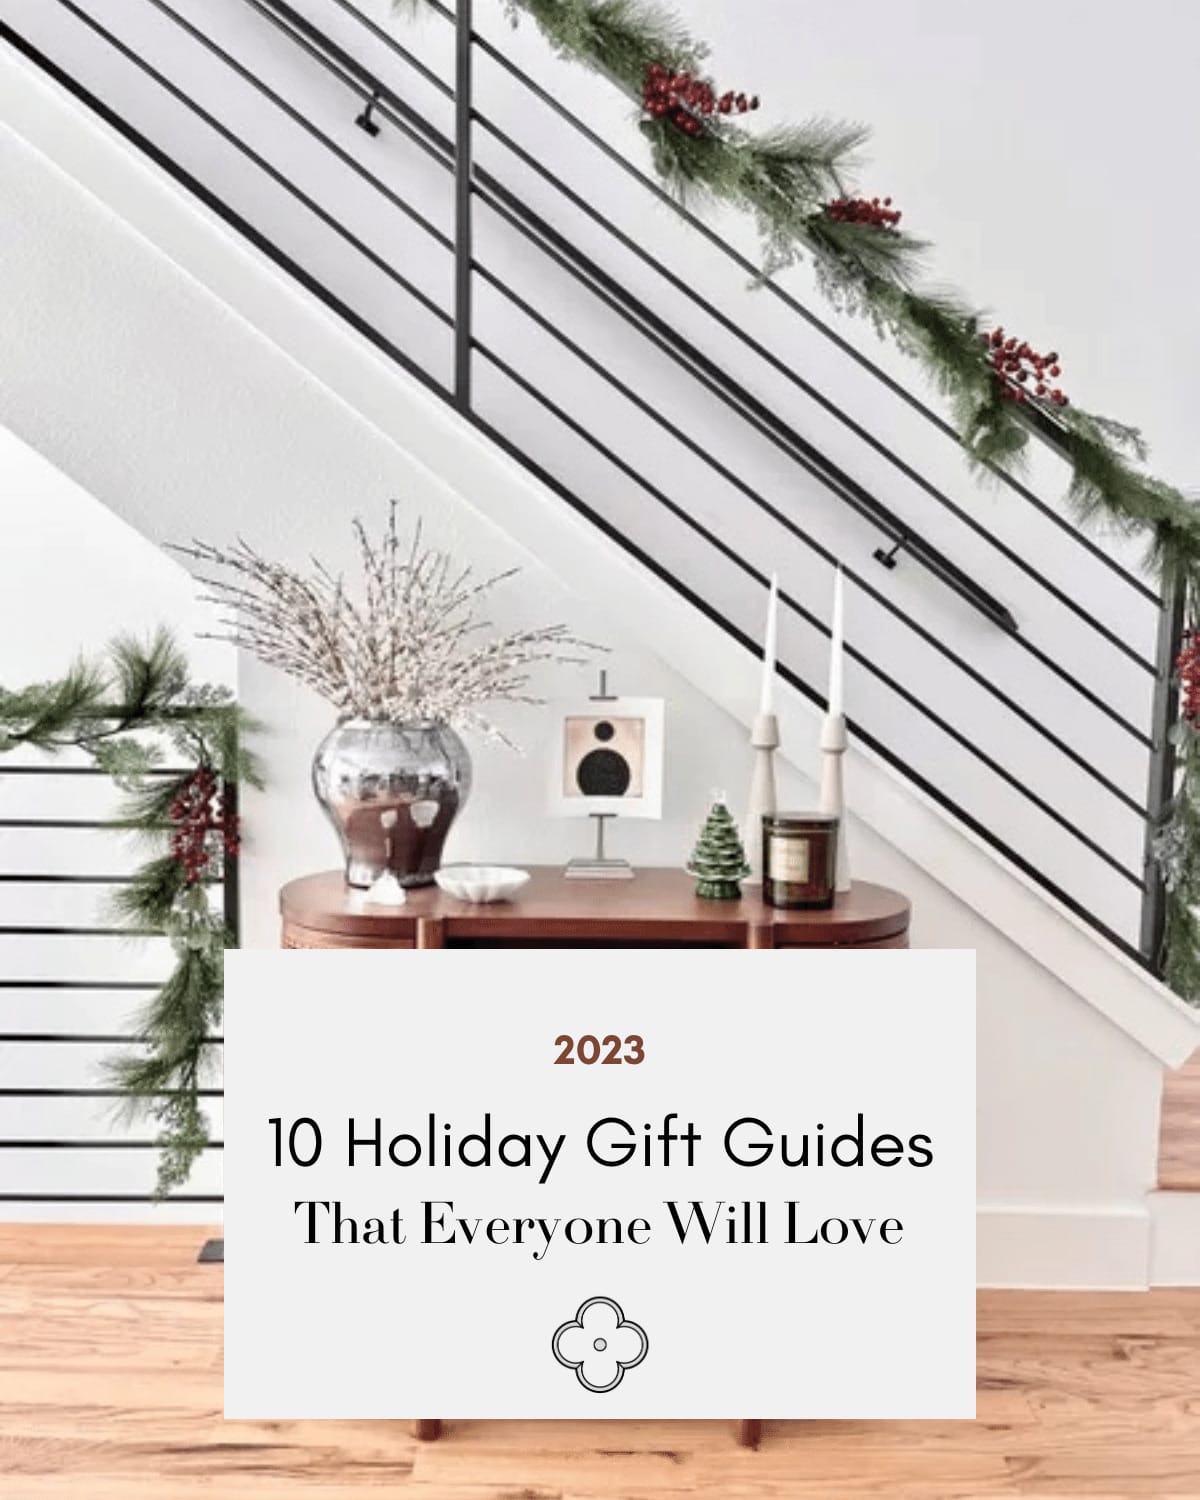 10 holiday gift guides everyone will love | #holiday #giftguide #christmas #giftideas #2023 #seasonal #giftsforher #giftsforhim